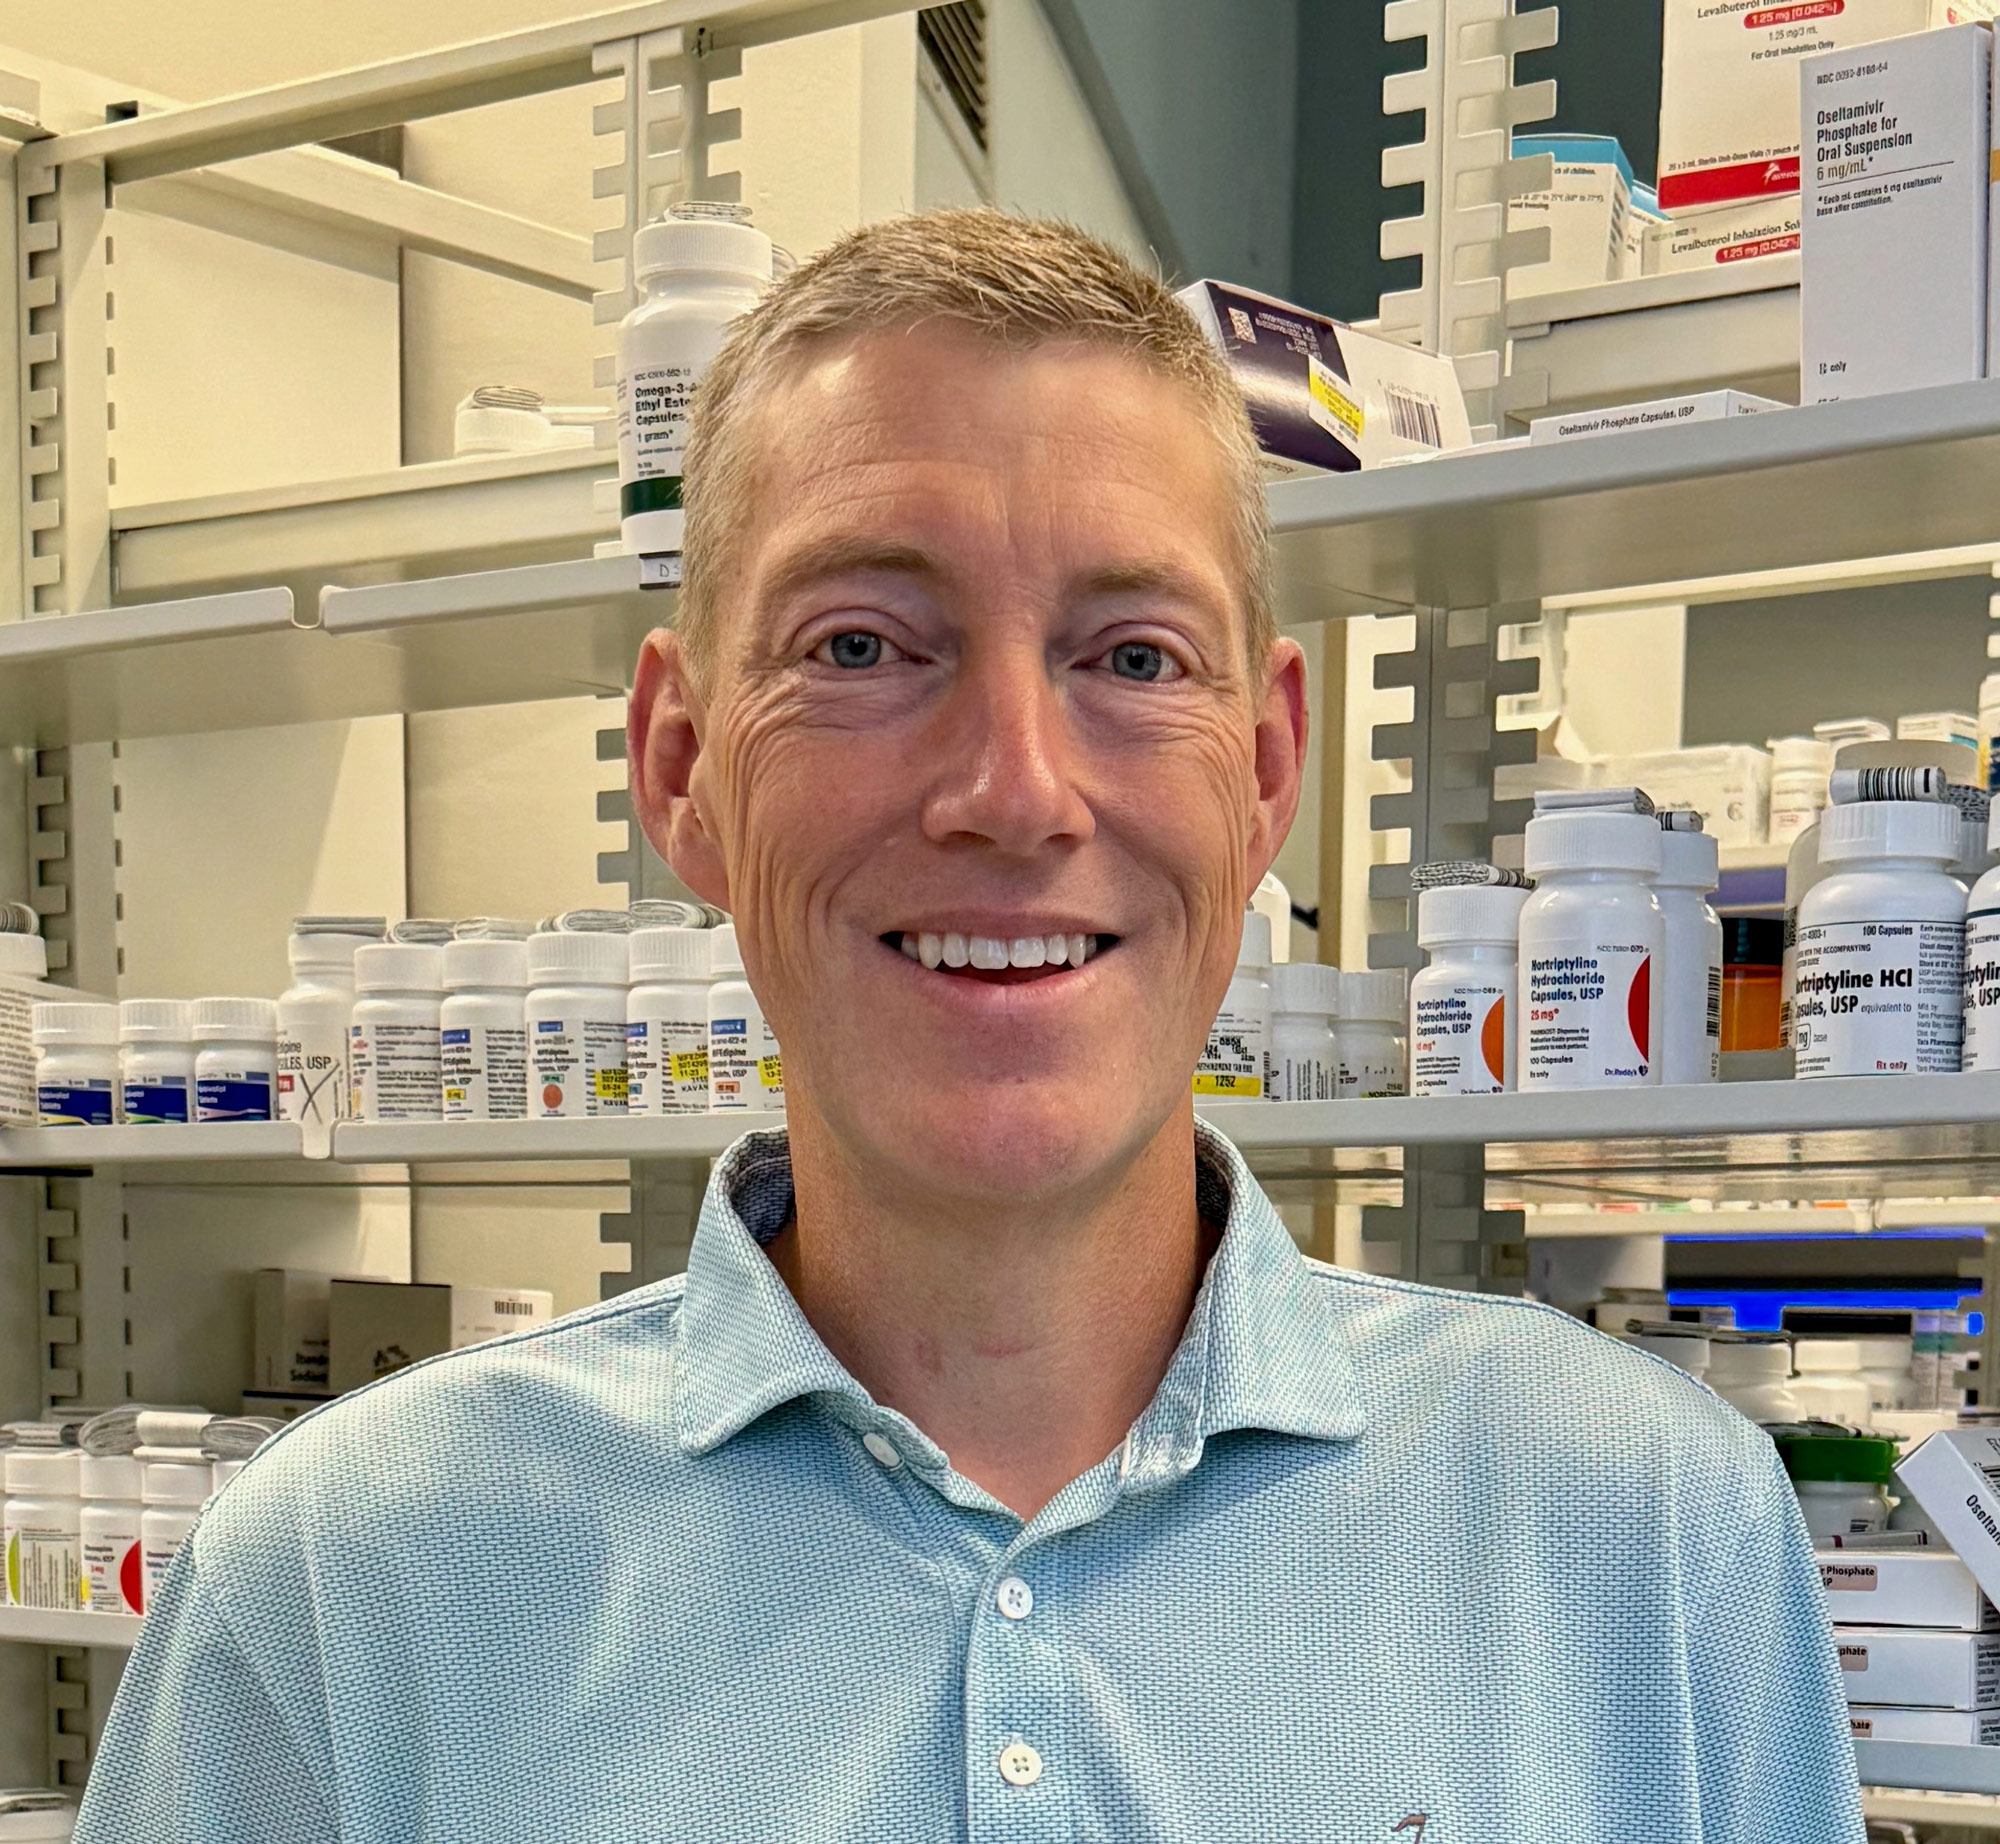 A photo of a man smiling in front of shelves of prescriptions indoors